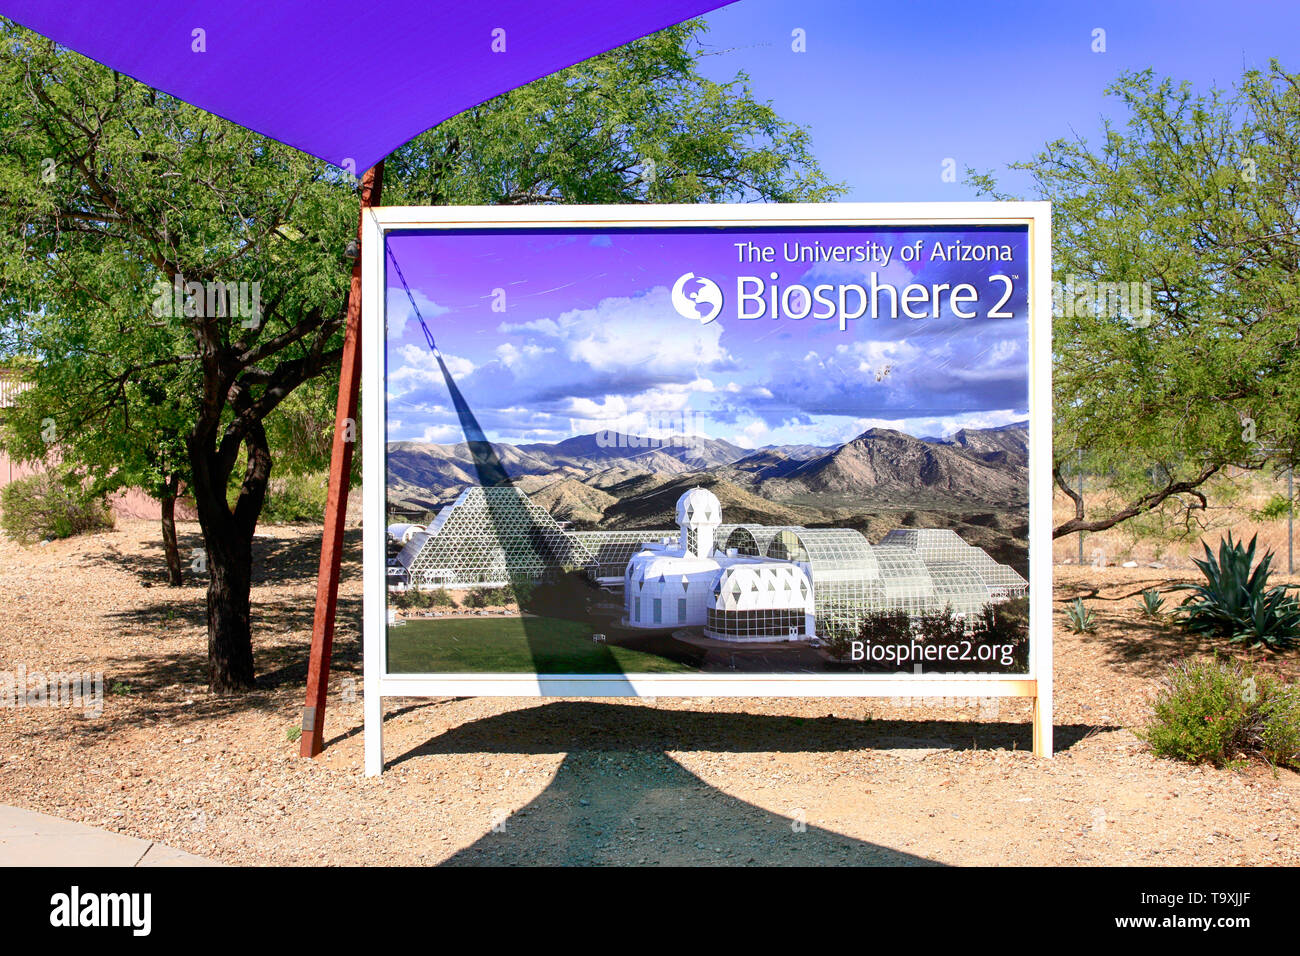 Riesiges poster Plakat am Eingang Bisosphere 2, die Amerikanische Earth System Science Research Facility in Oracle, AZ entfernt Stockfoto